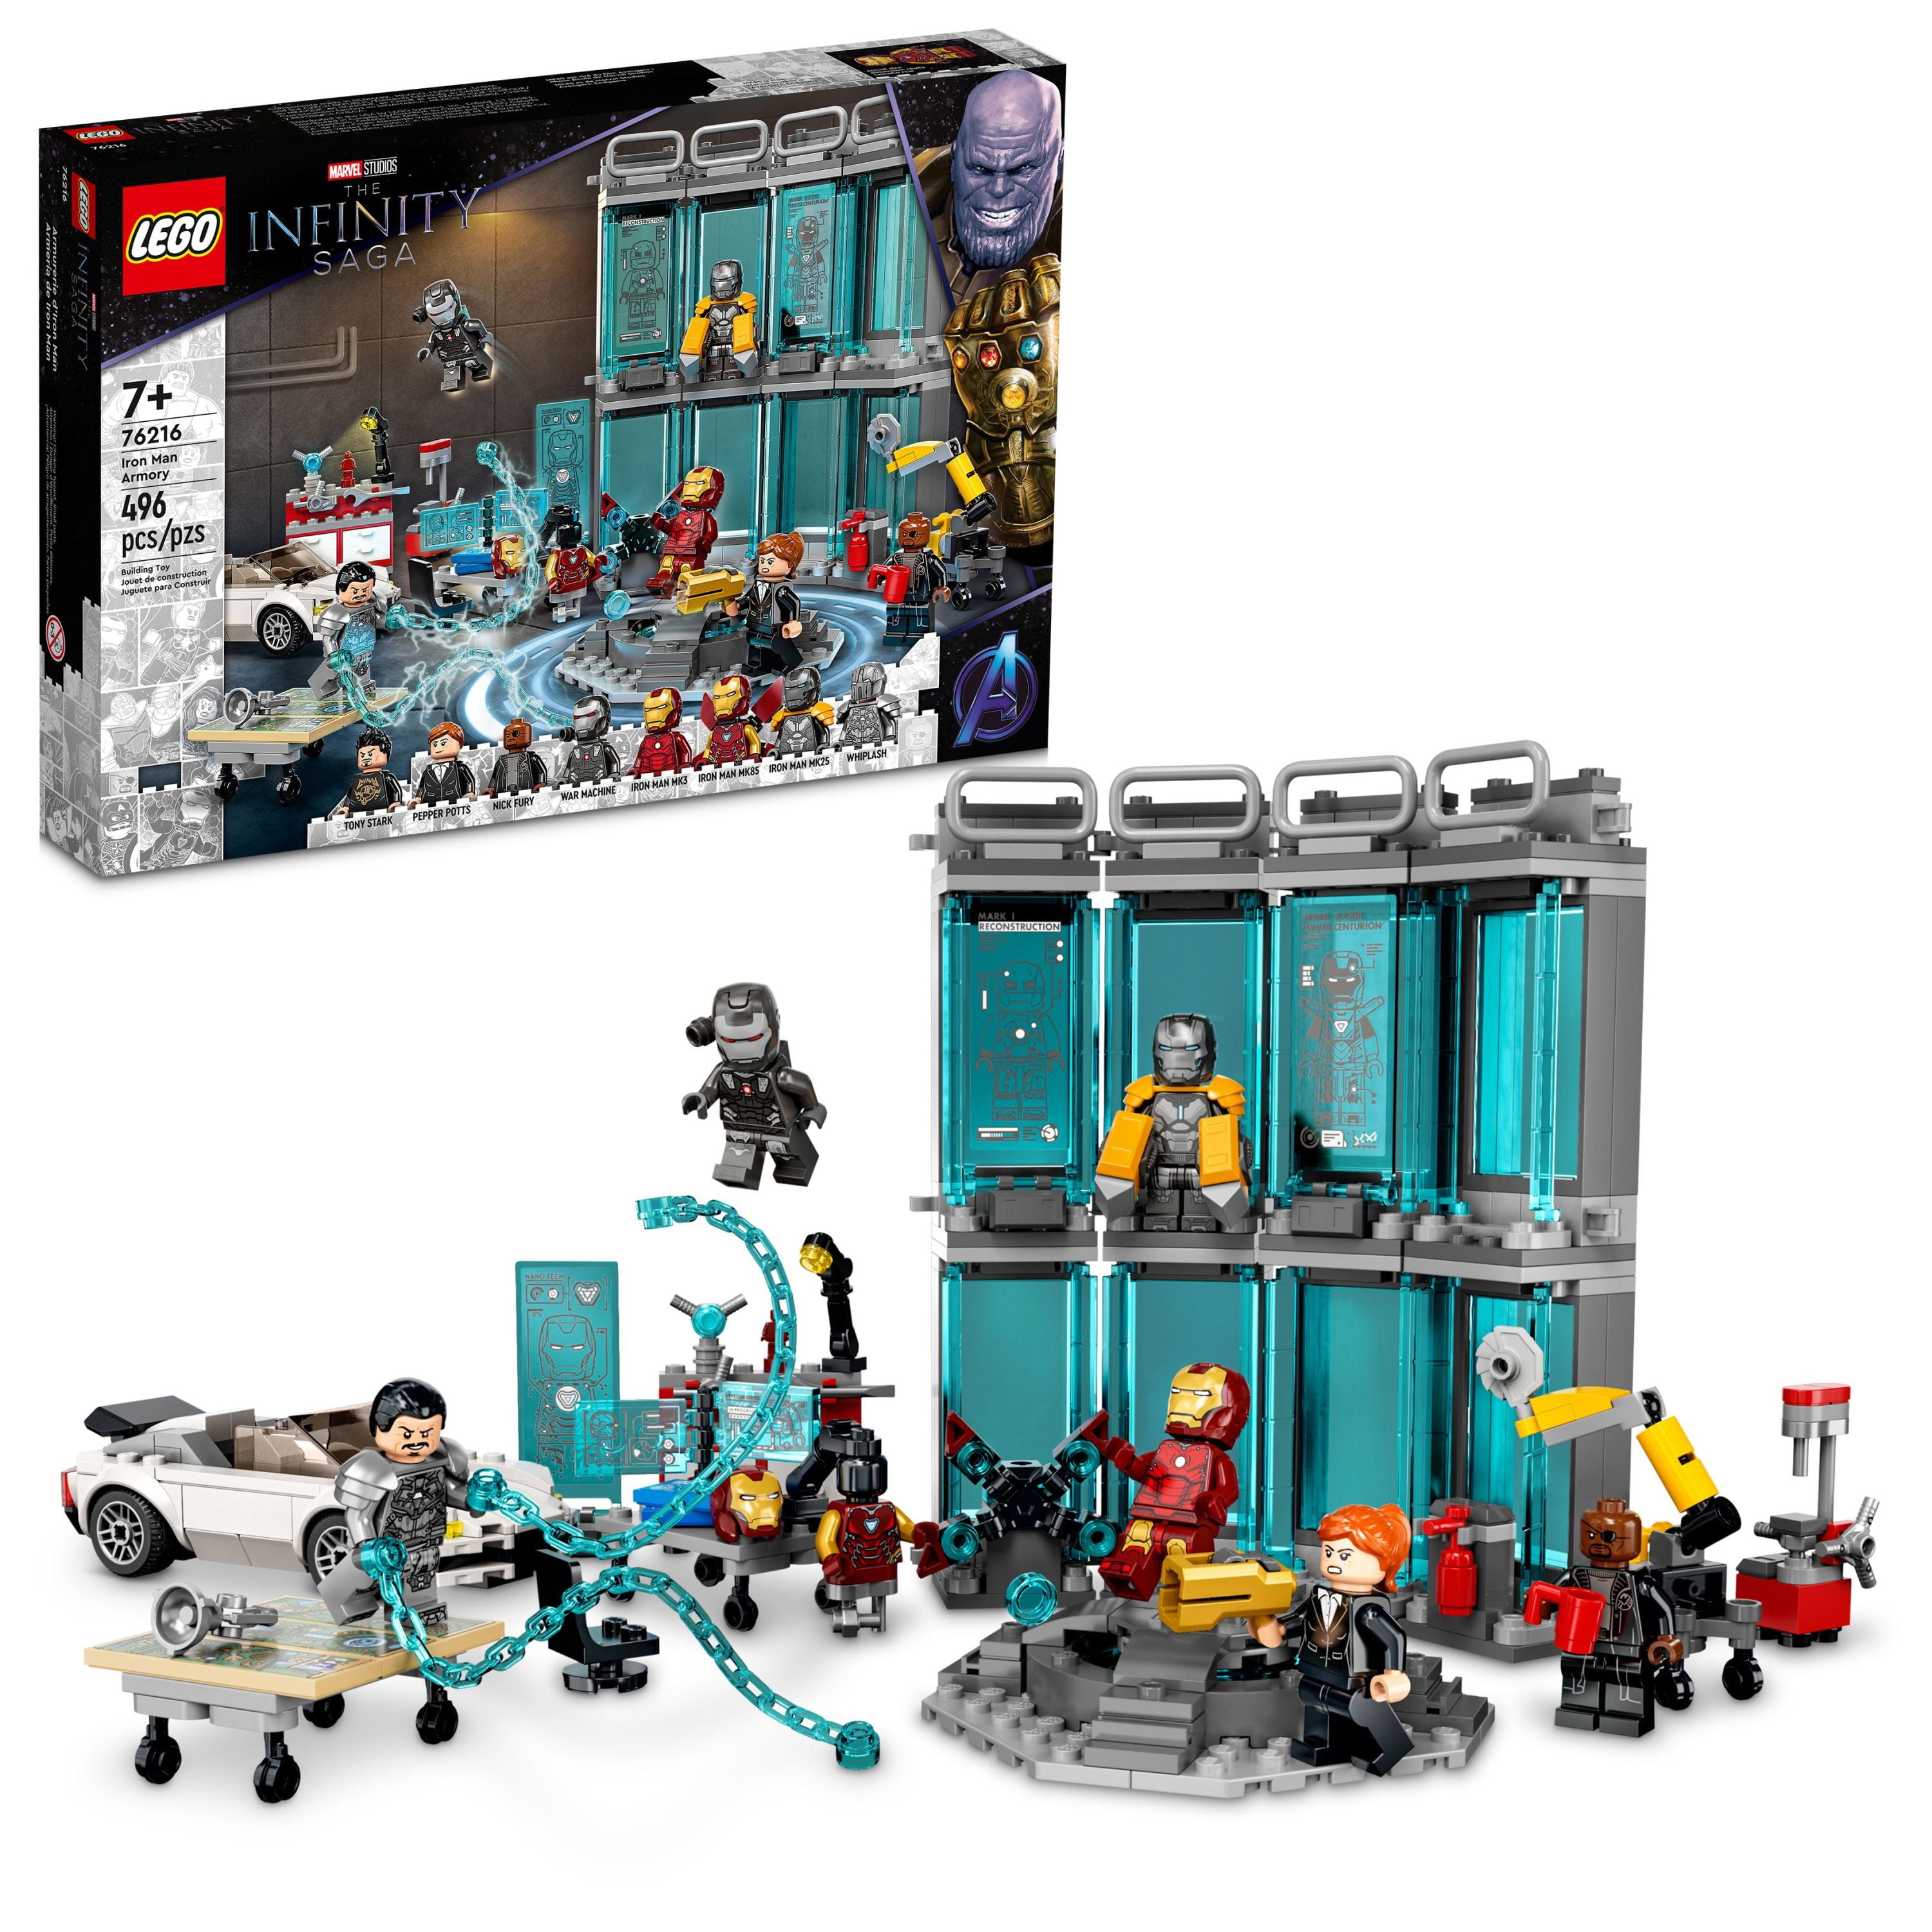 LEGO Marvel Iron Man Armory, Buildable Toy, 76216 Avengers Gift for 7 Plus Year Old Kids, Boys & Girls with MK3, MK25 and MK85 Suit Minifigures